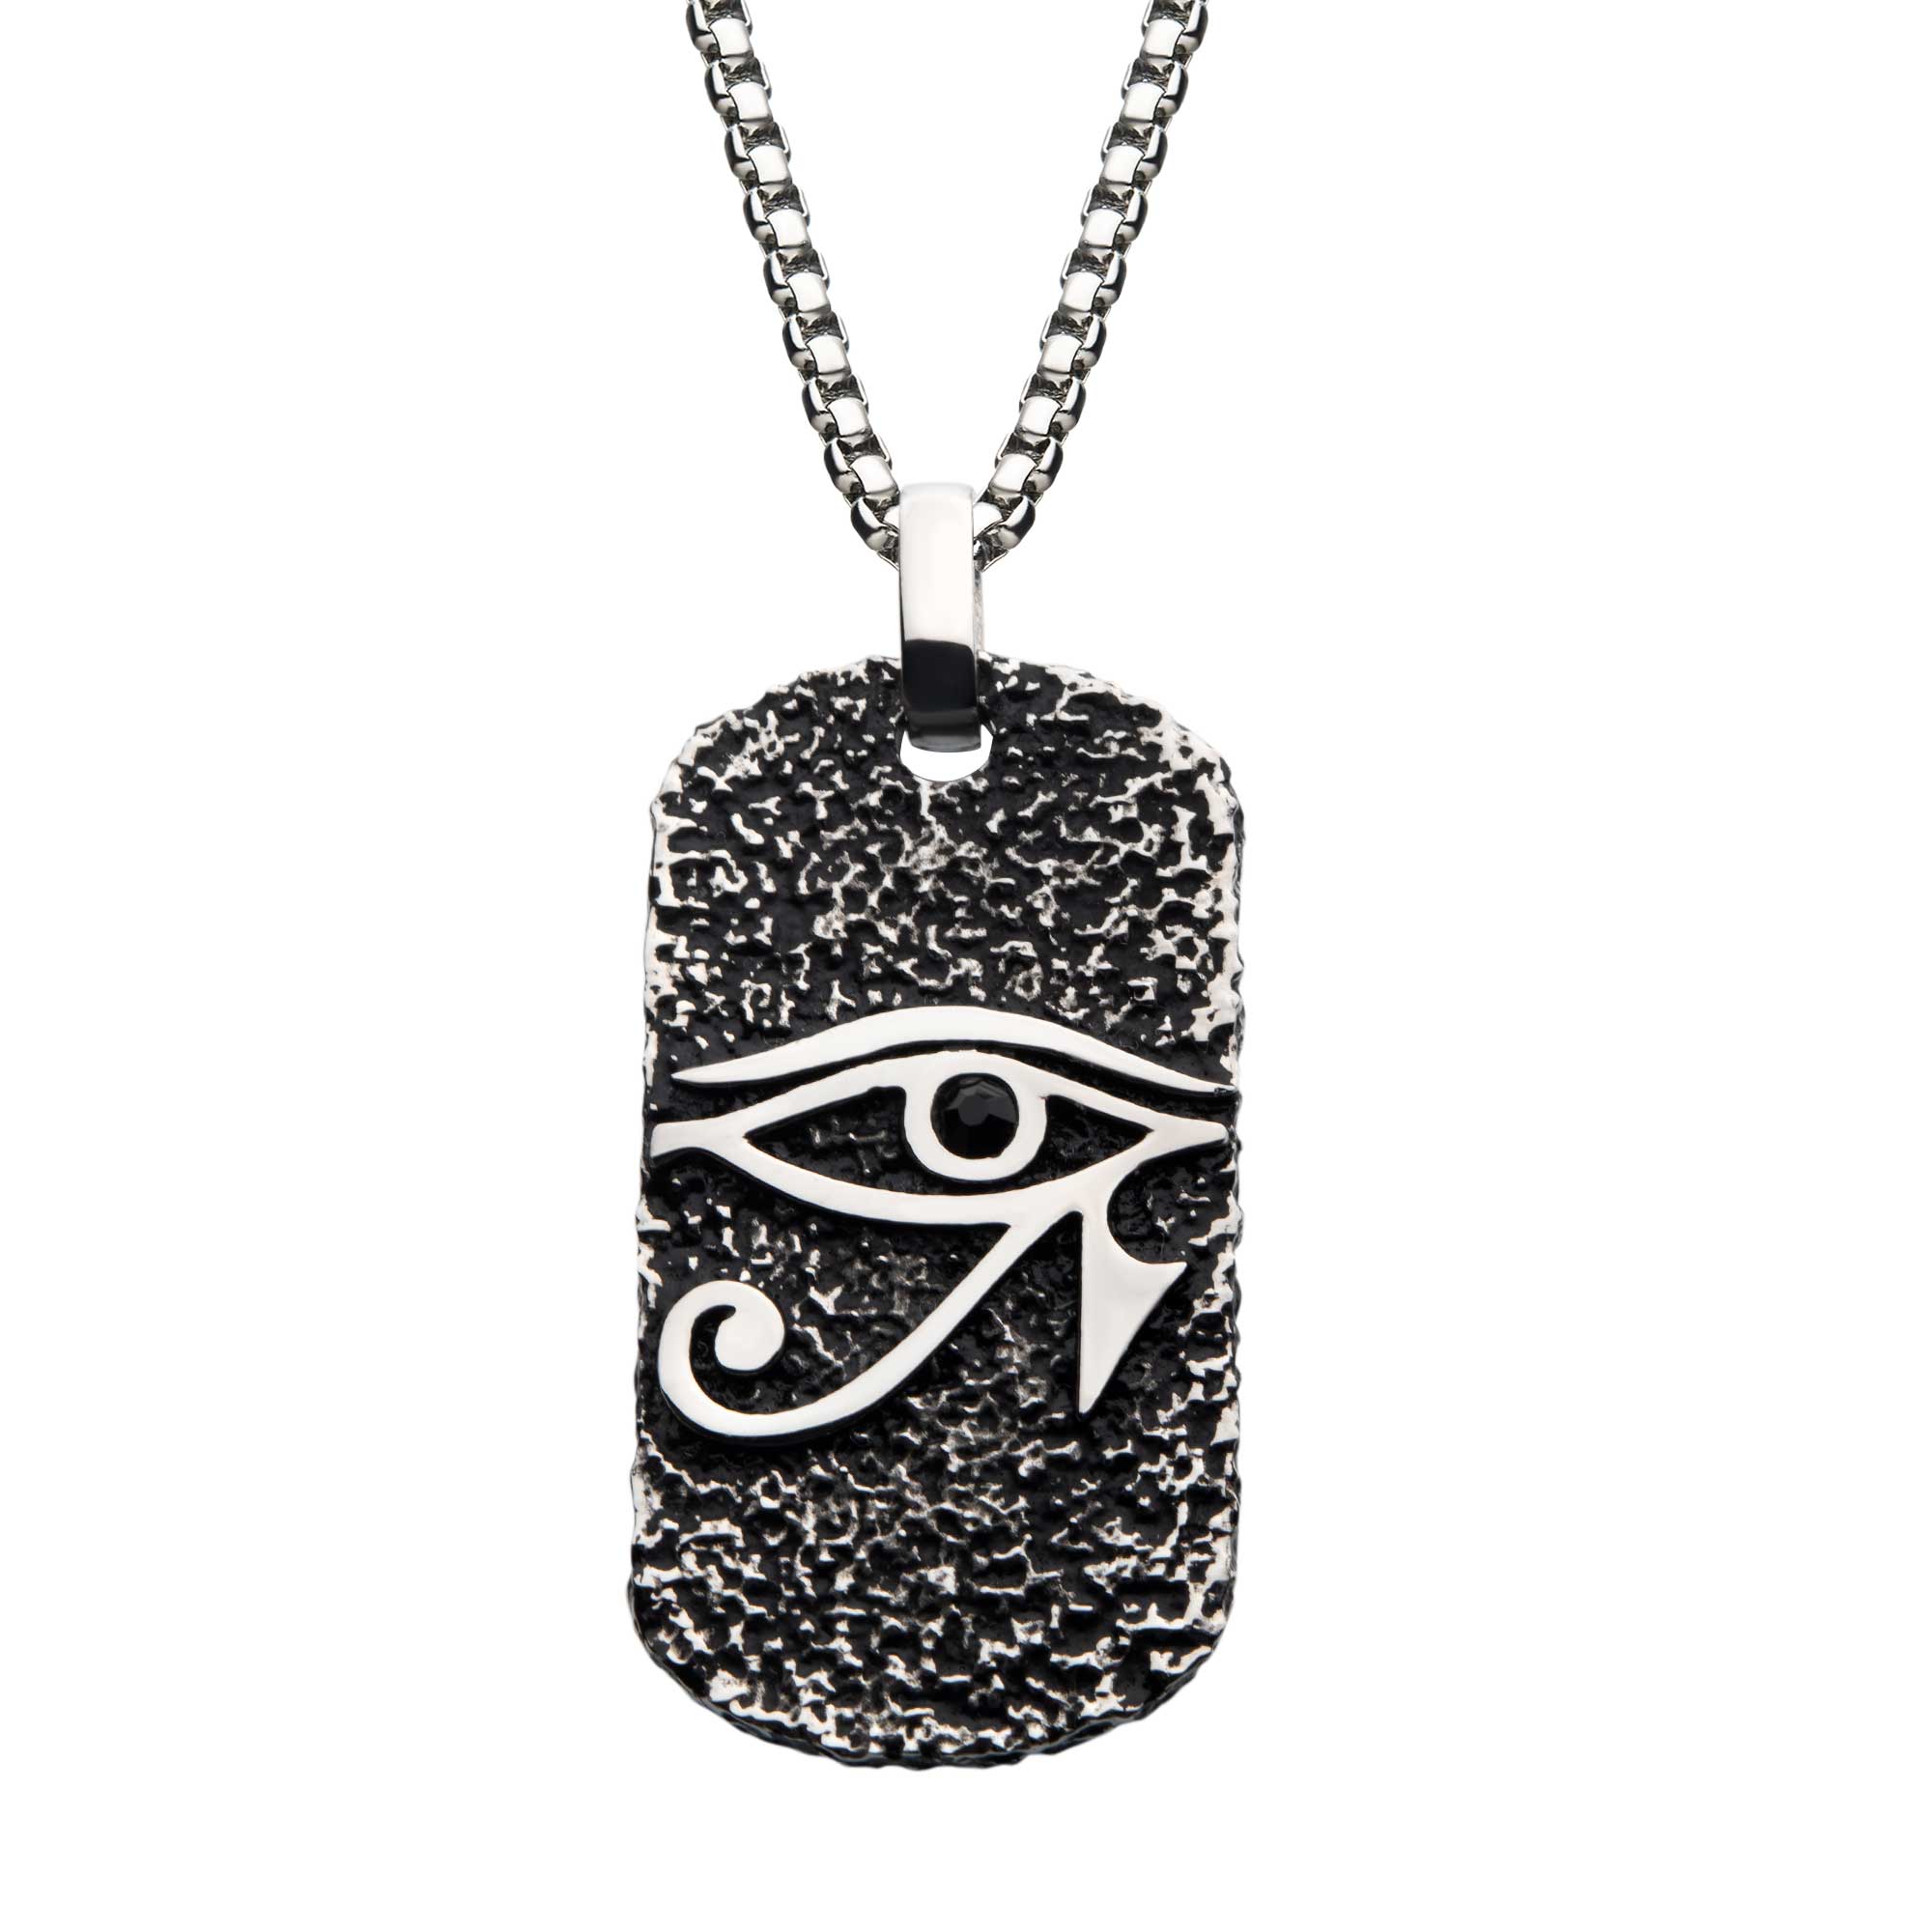 Black Oxidized Stainless Steel with Black CZ Eye of Horus Dog Tag Pendant, with Steel Box Chain Thurber's Fine Jewelry Wadsworth, OH